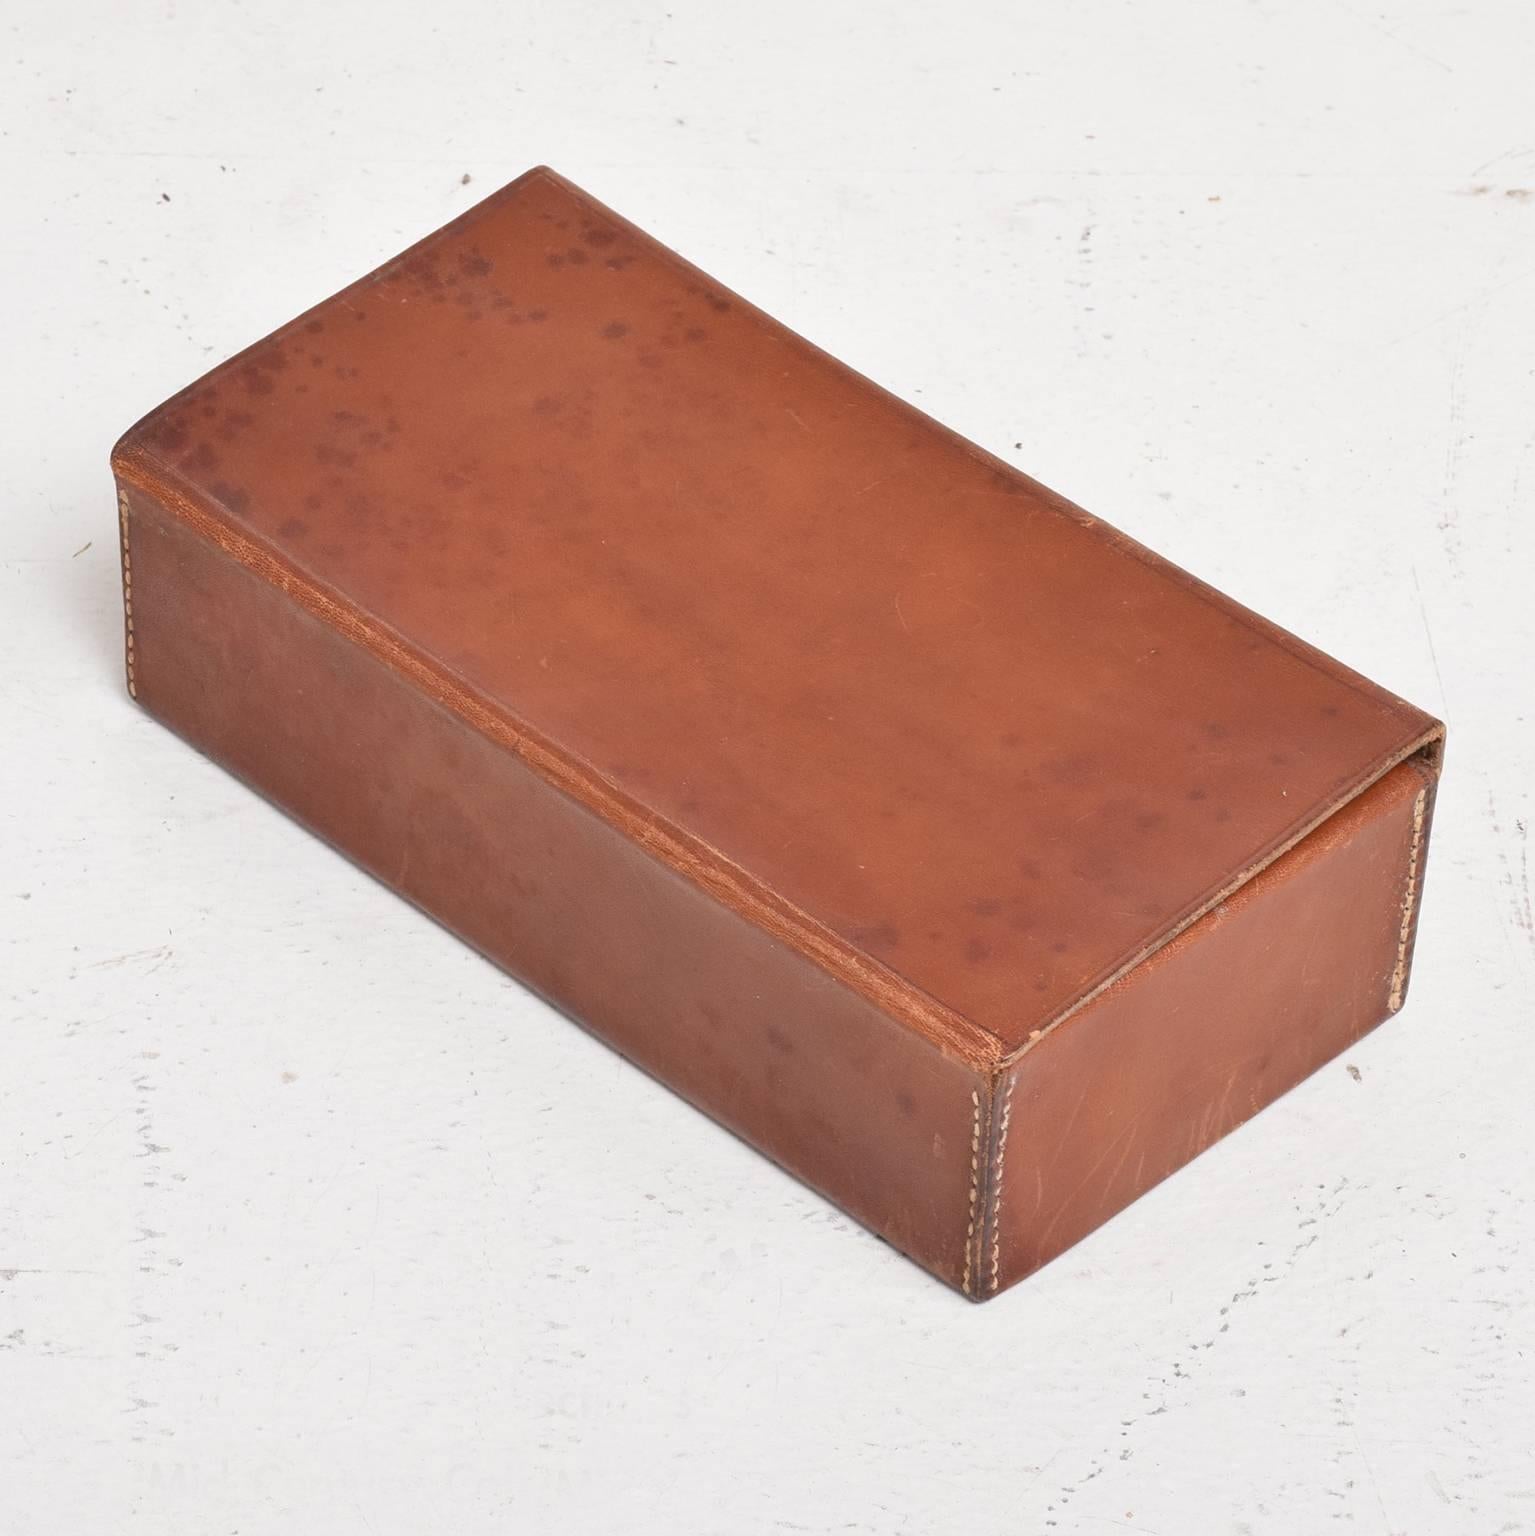 Patinated Mid-Century Modern Saddle Leather Box with Lock